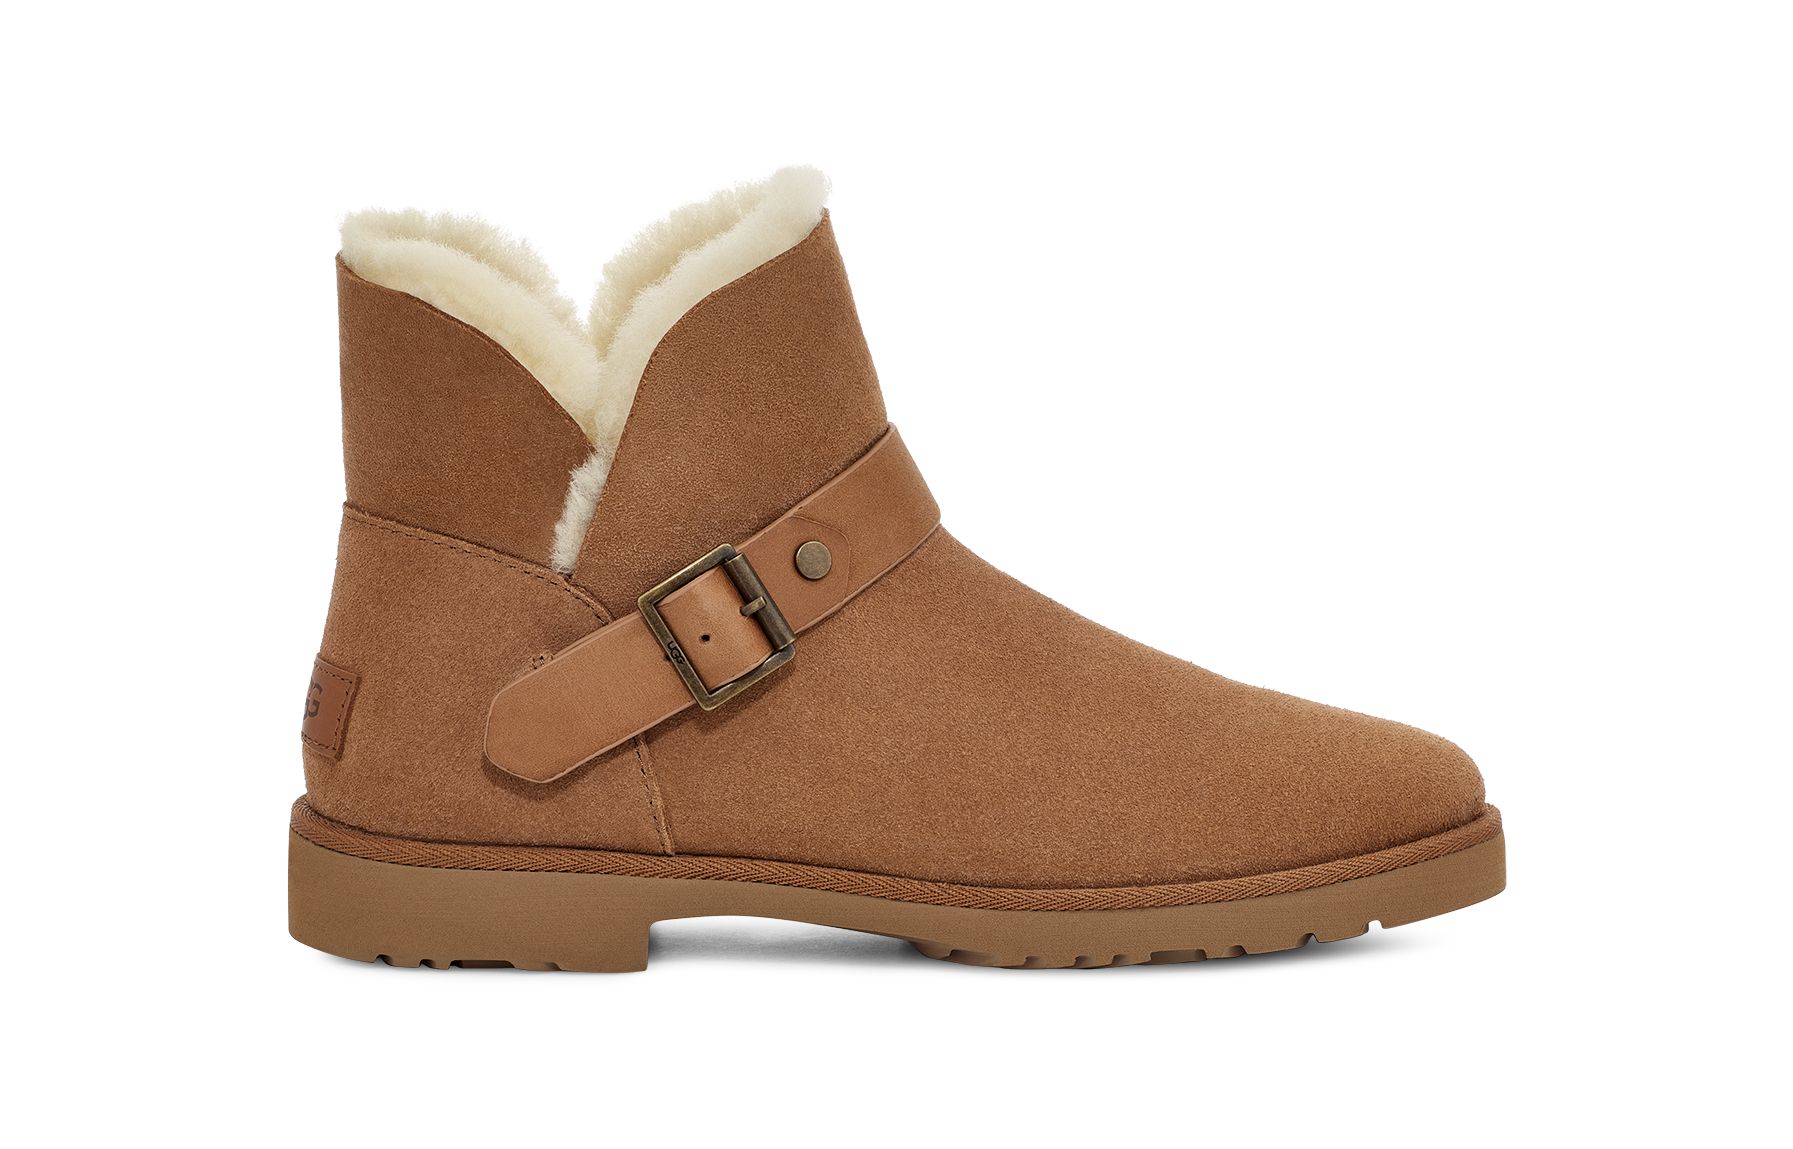 UGG Women's Romely Short Buckle Sheepskin Classic Boots in Chestnut, Size 7.5 | UGG (US)